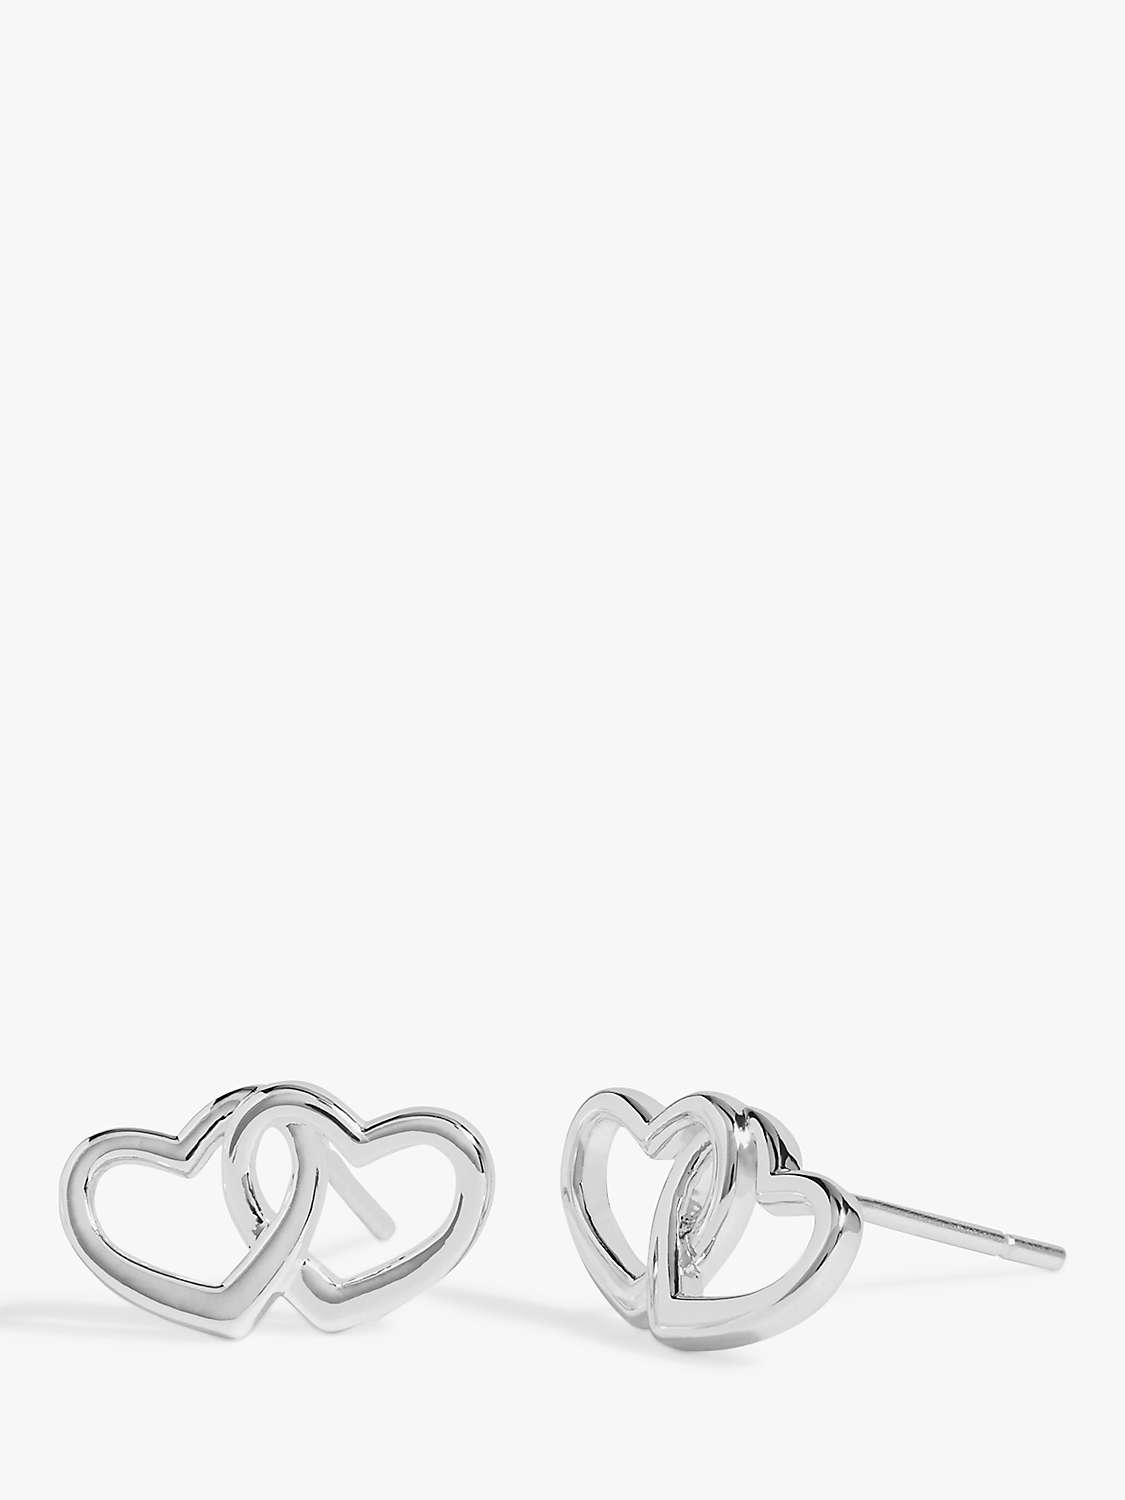 Buy Joma Jewellery Forever Friendship Entwined Hearts Earrings, Silver Online at johnlewis.com